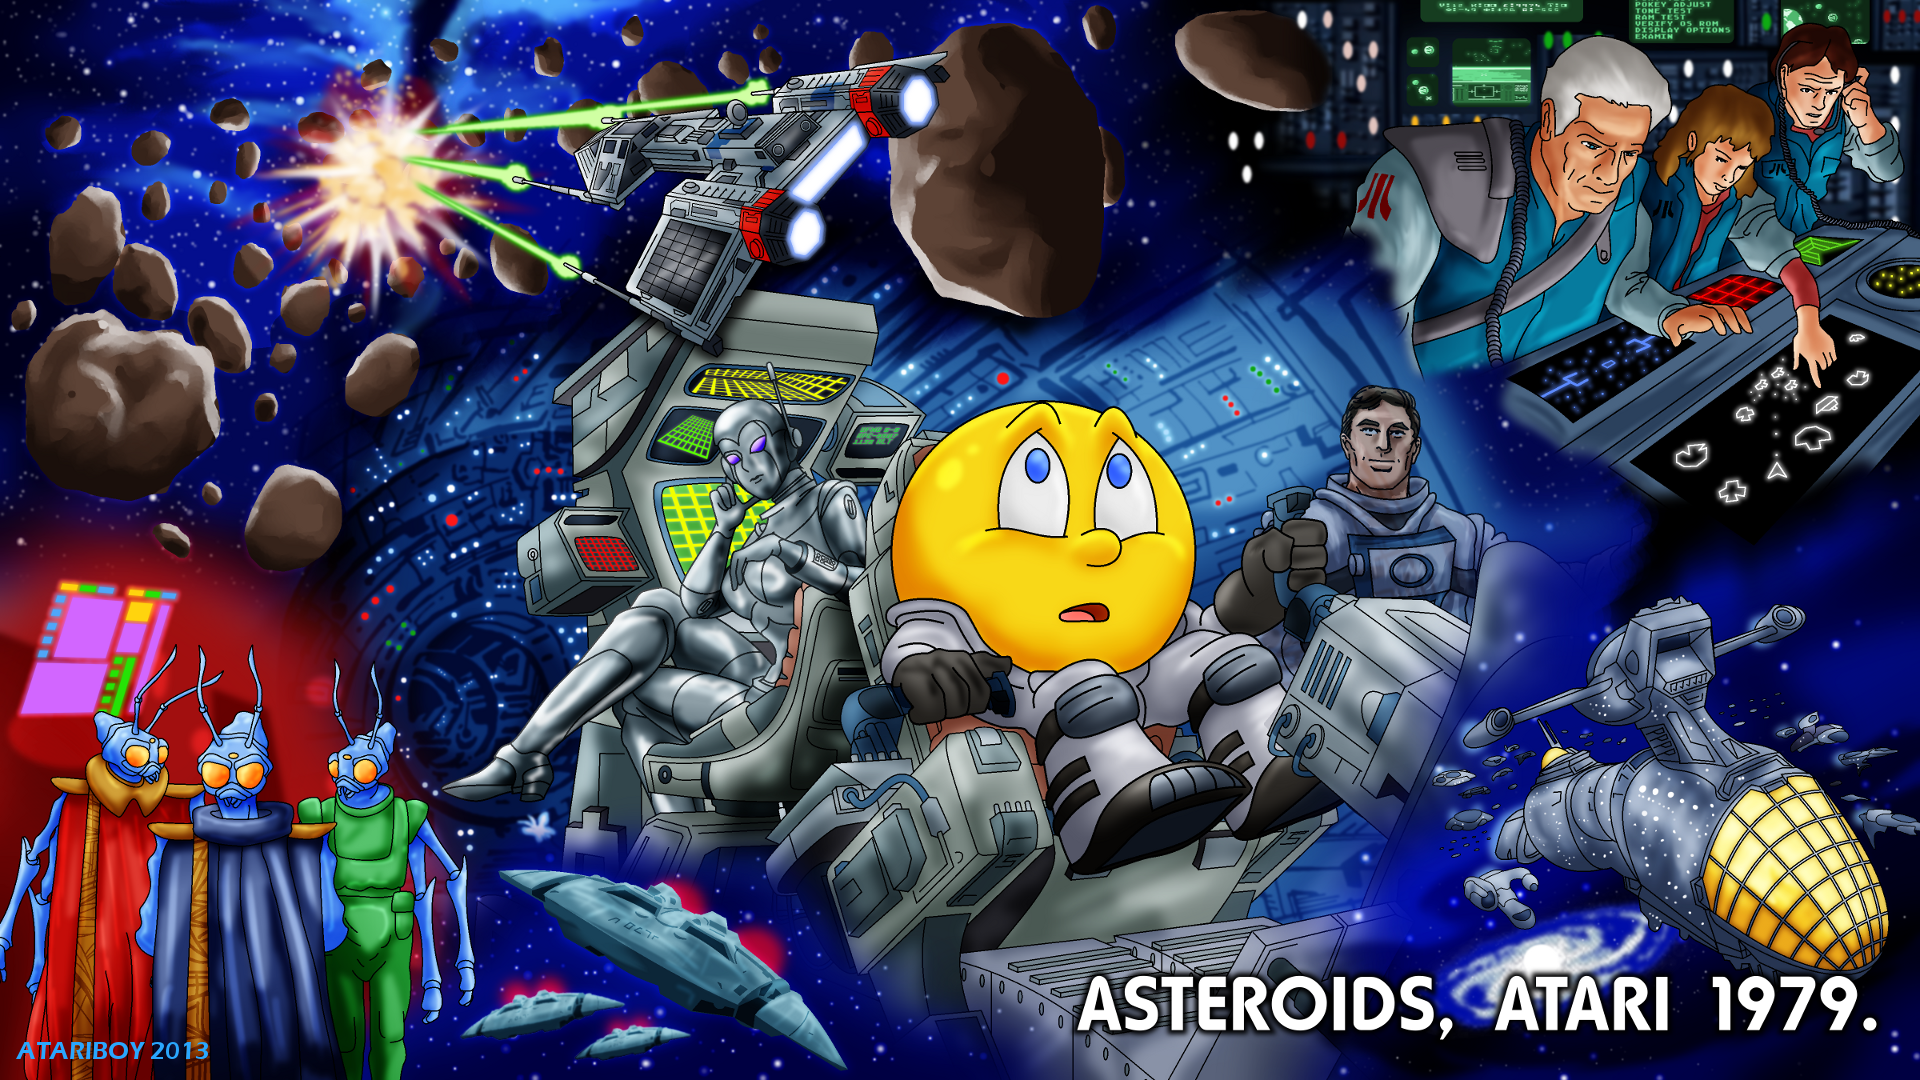 pacman_fanfic___asteroids_1979__by_atari